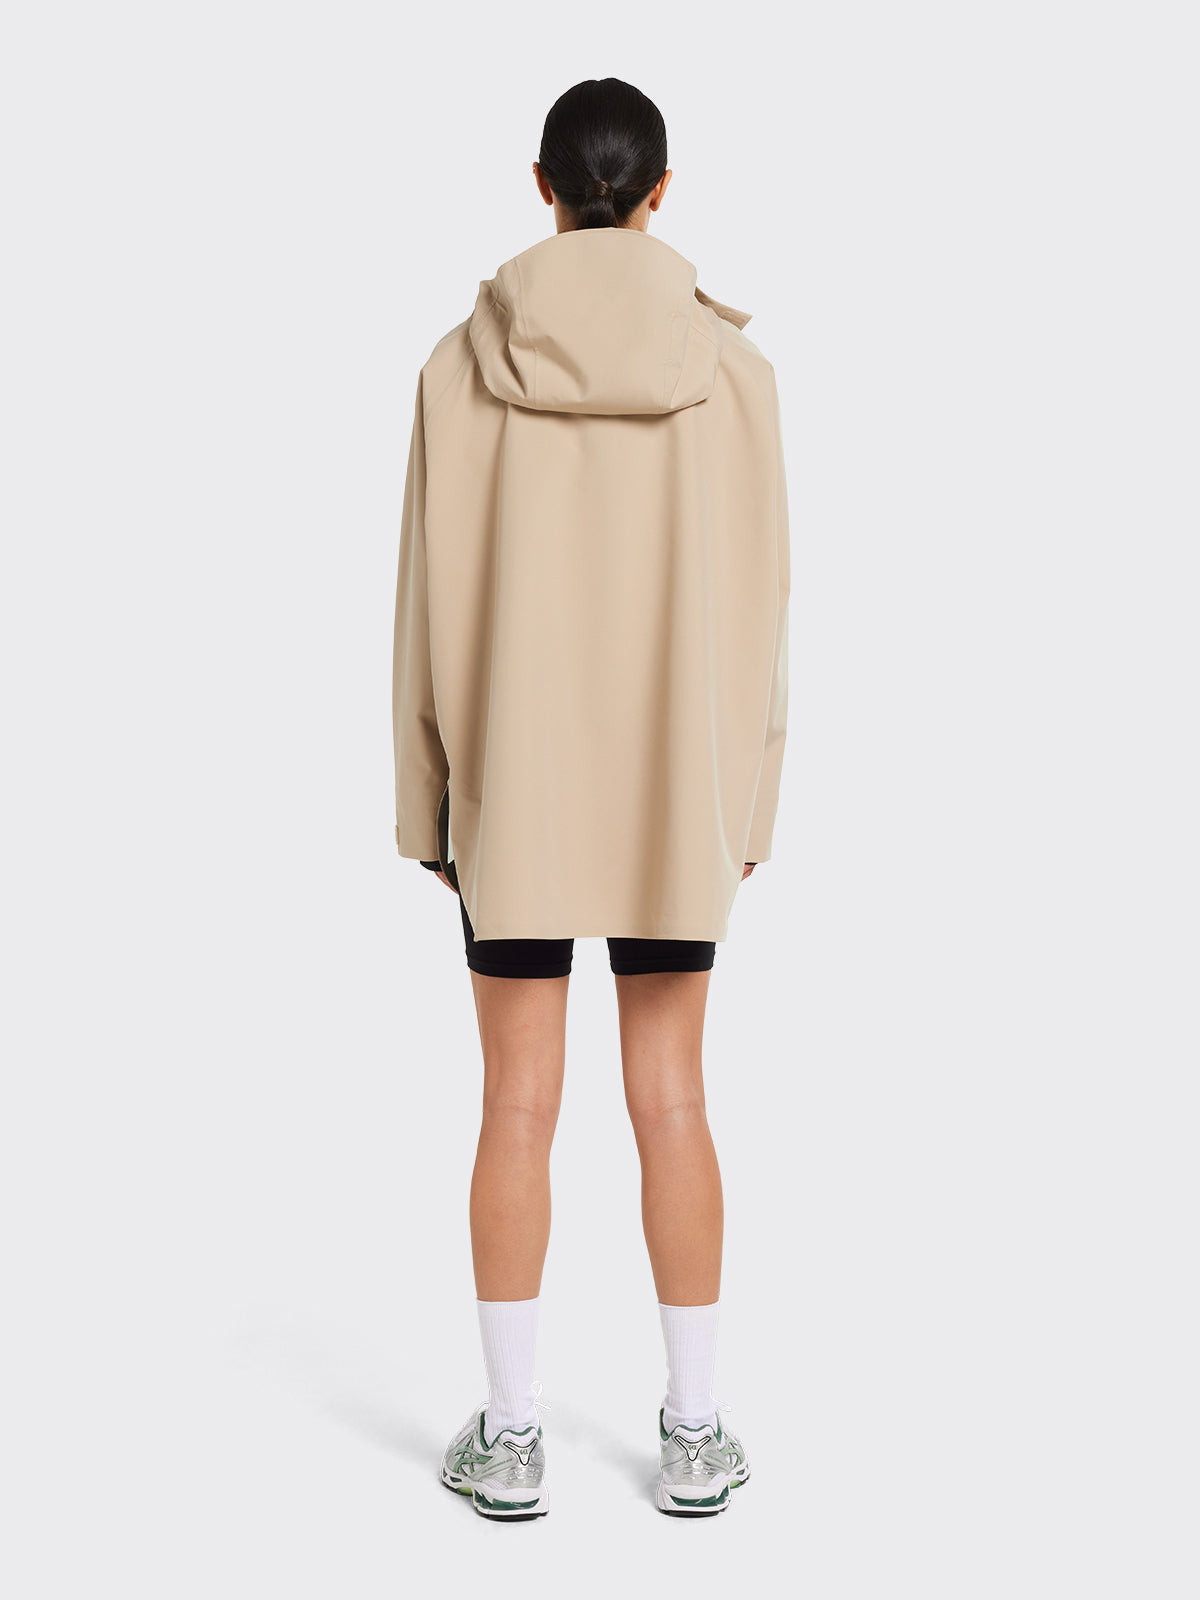 Woman in Voss poncho from Blæst in Beige